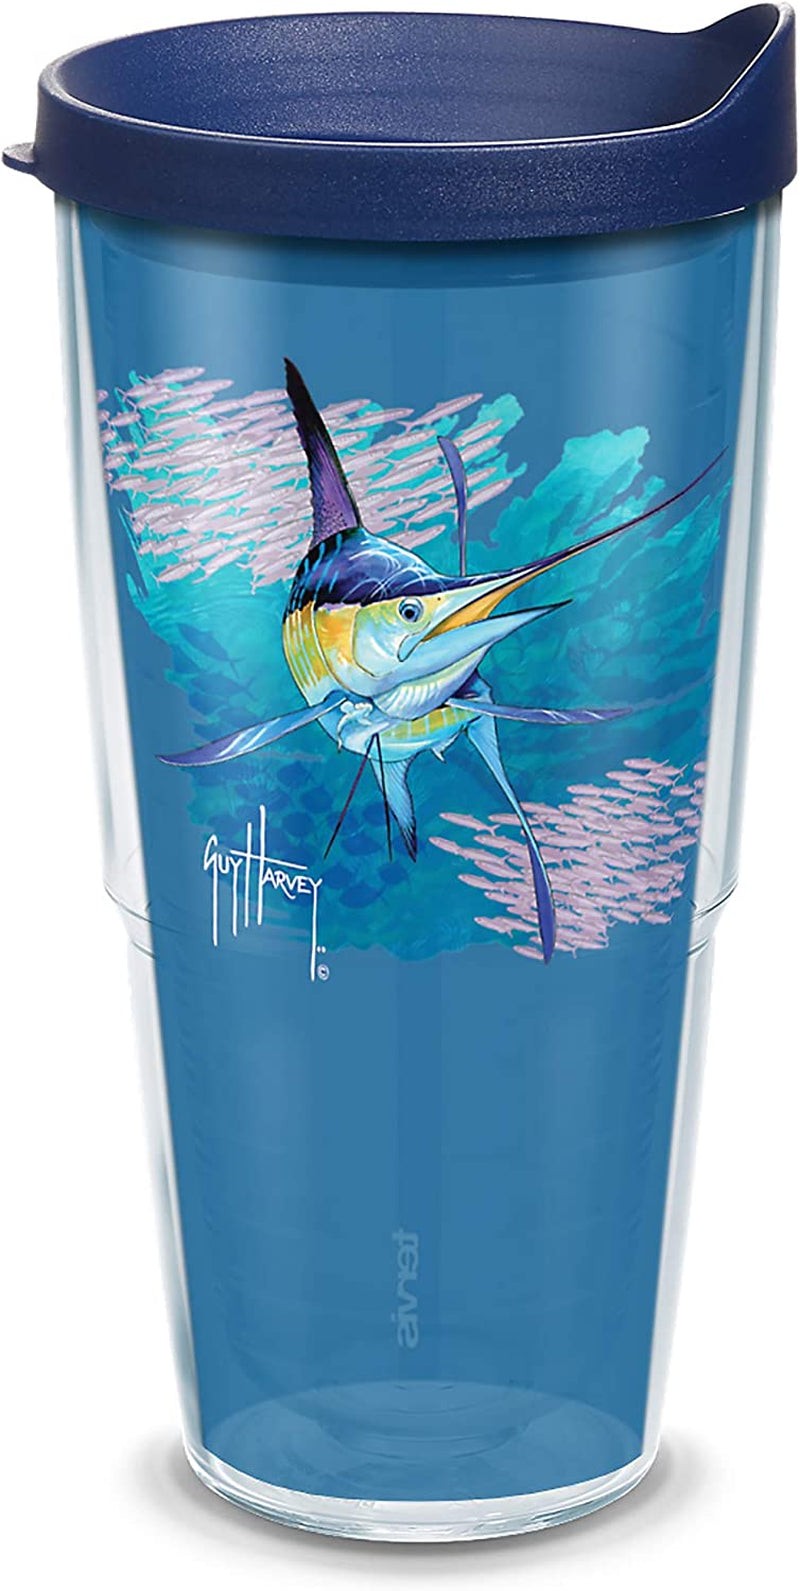 Tervis Made in USA Double Walled Guy Harvey - Offshore Haul Marlin Insulated Tumbler Cup Keeps Drinks Cold & Hot, 16Oz Mug, Classic